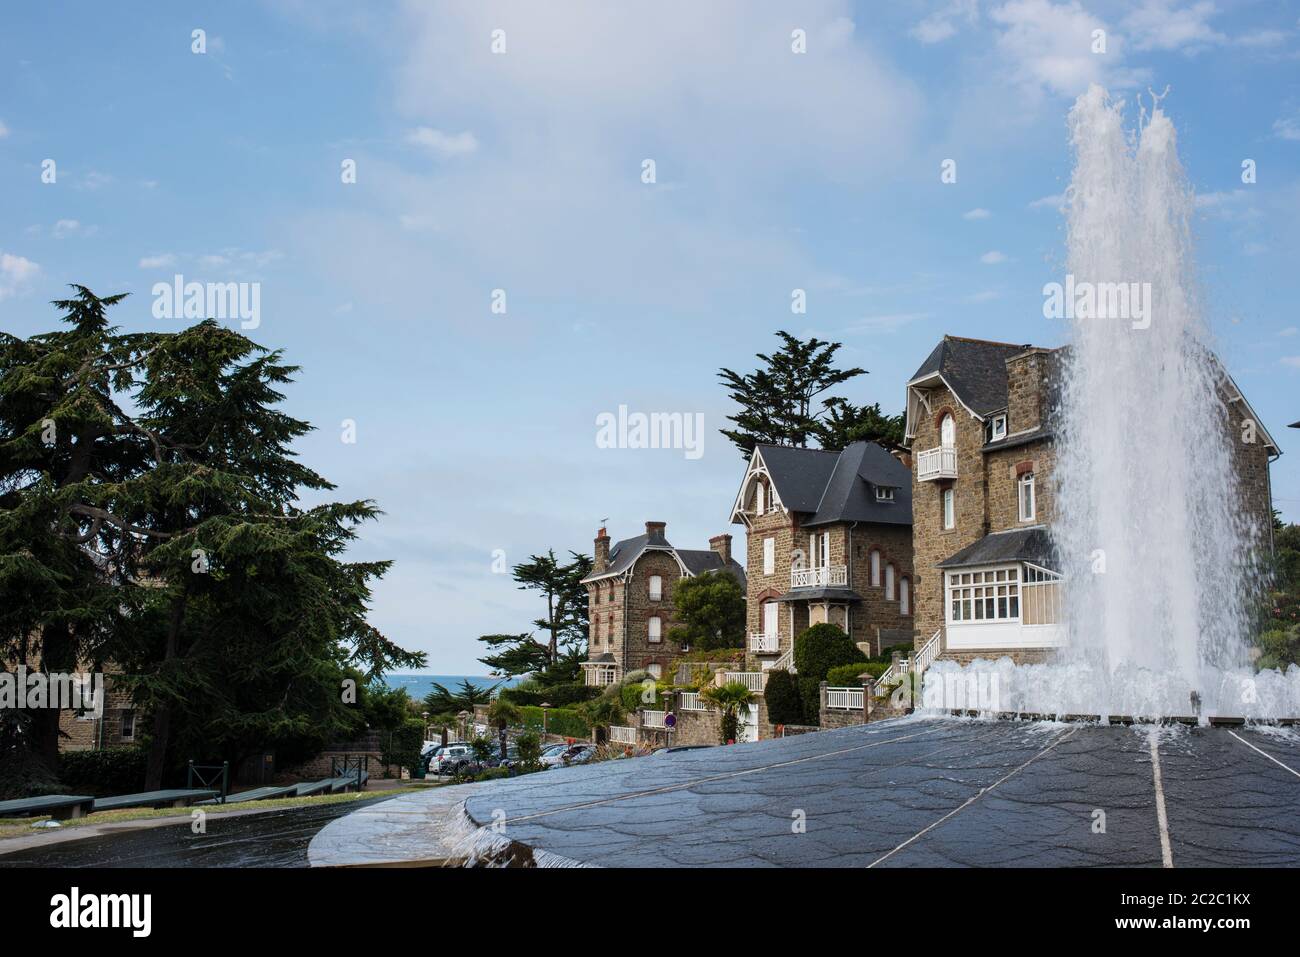 Fountain St Enogat, Dinard, Brittany, France Stock Photo